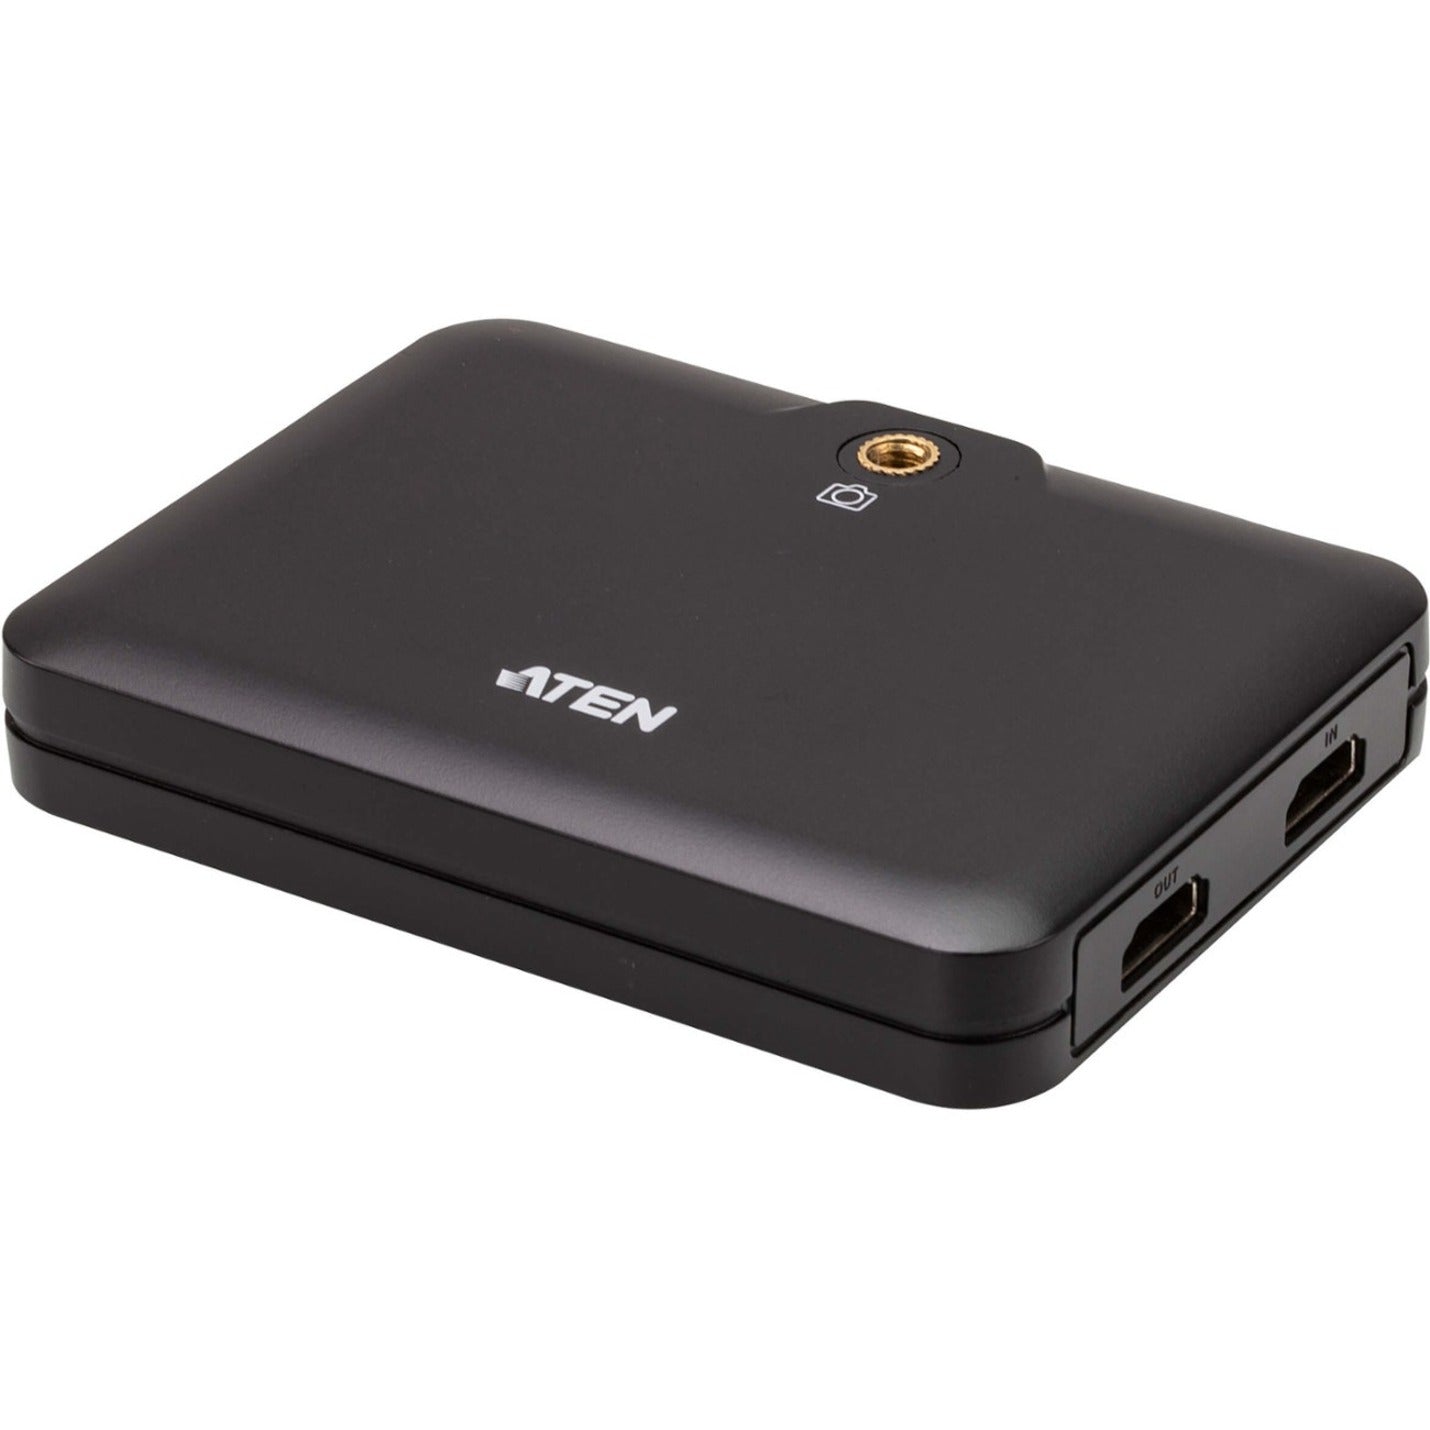 ATEN UC3021 CAMLIVE+ HDMI to USB-C UVC Video Capture with PD3.0 Power Pass-Through, Video Capturing Device